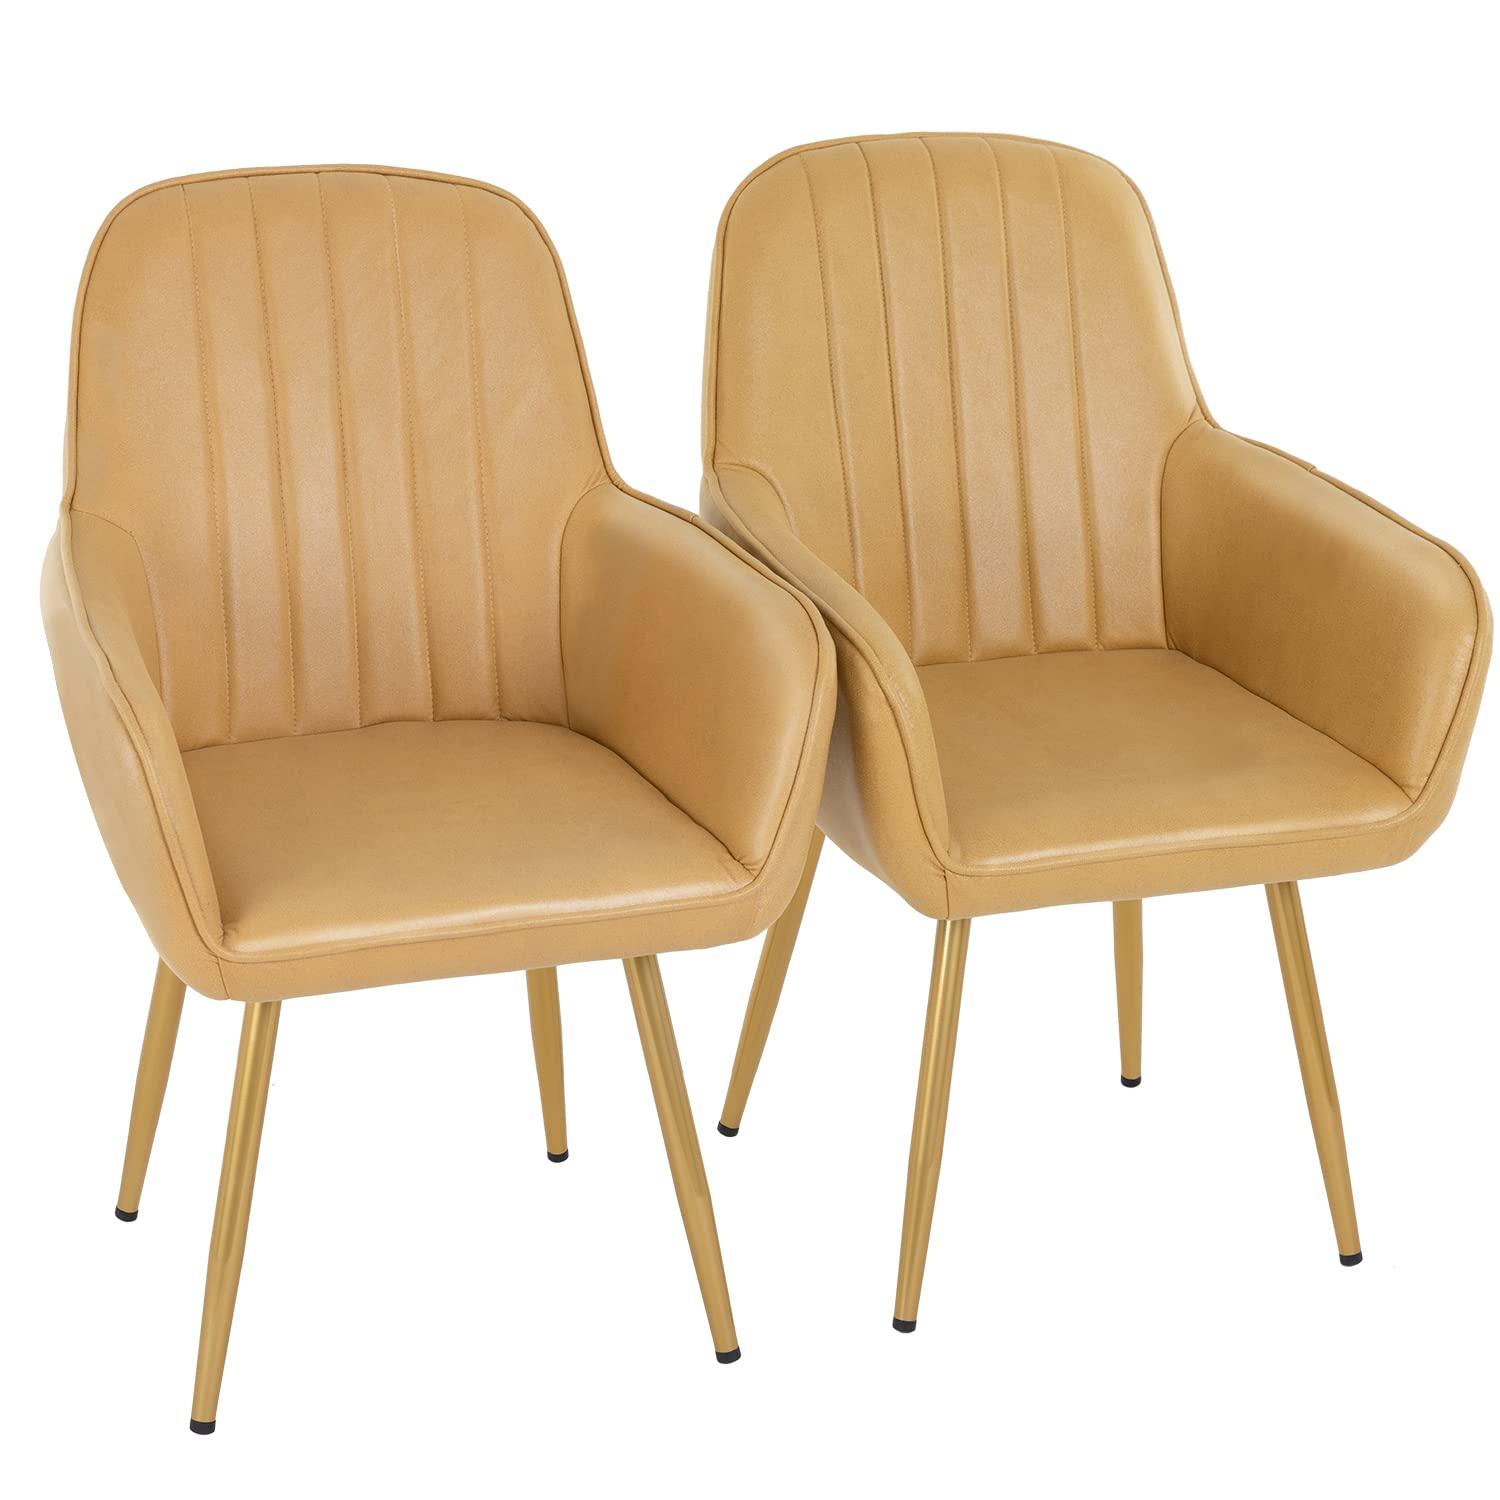 Set of 2 Yellow Faux Leather Arm Chairs with Metal Legs - Furniture4Design